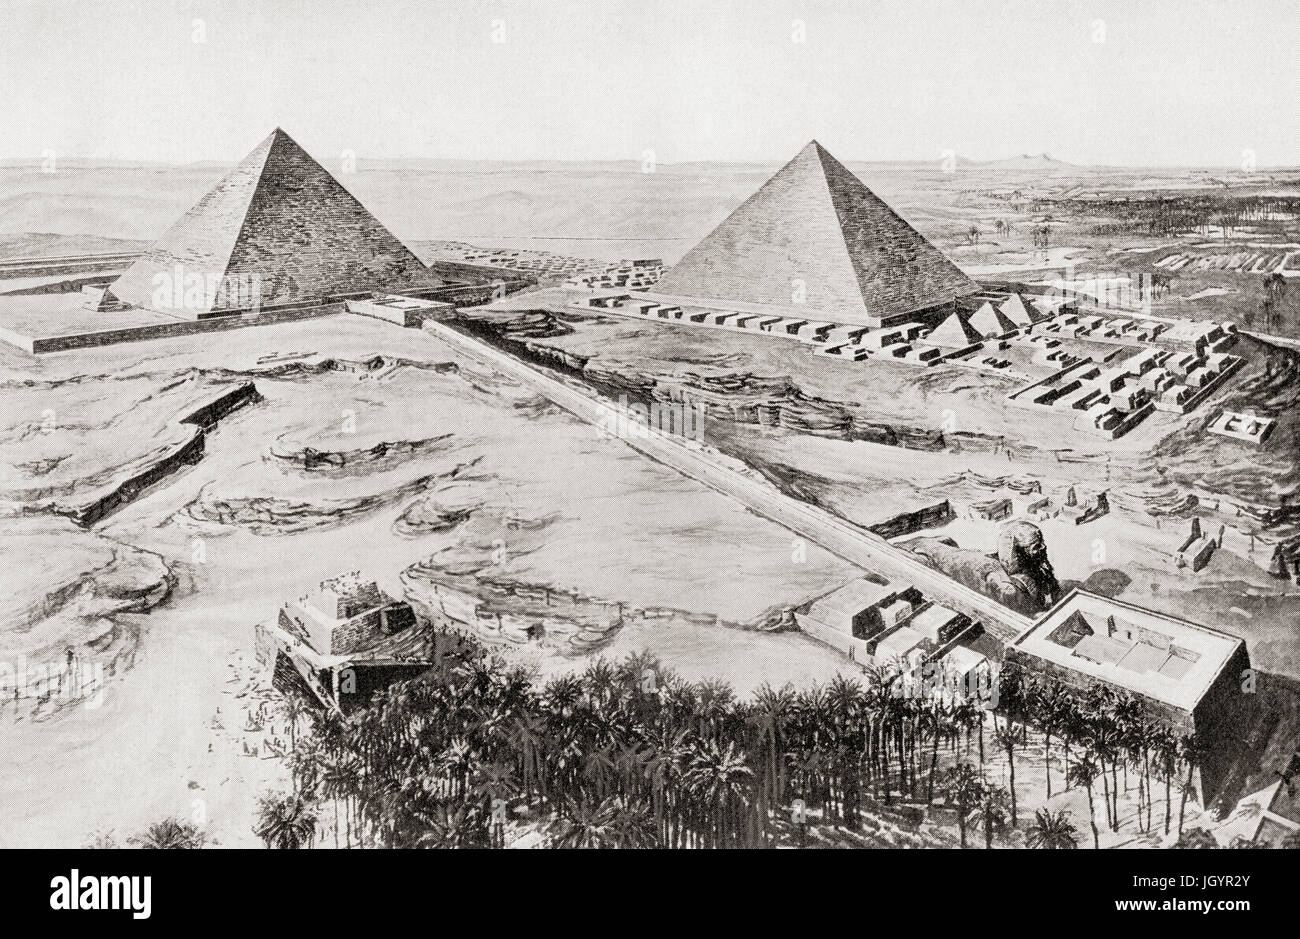 The pyramids at Giza, Egypt.  From Hutchinson's History of the Nations, published 1915. Stock Photo